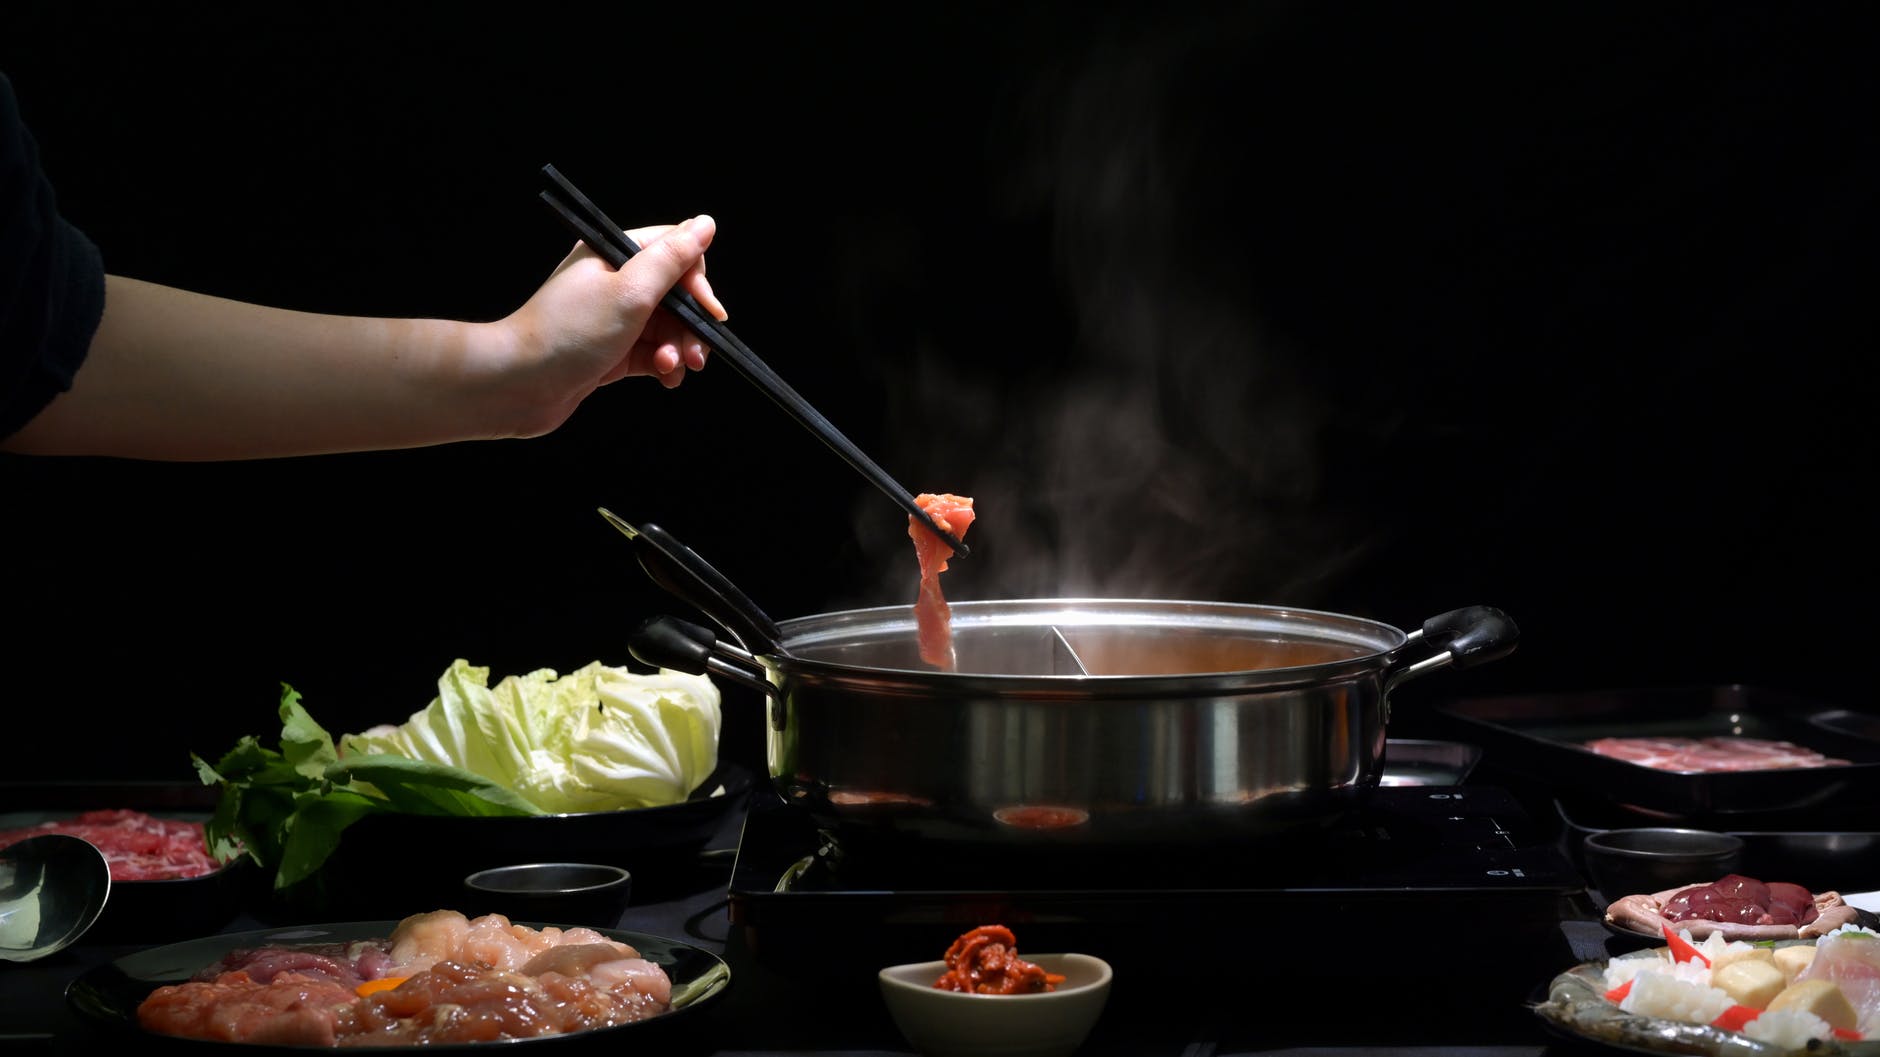 person holding black chopsticks and green vegetable on stainless steel cooking pot